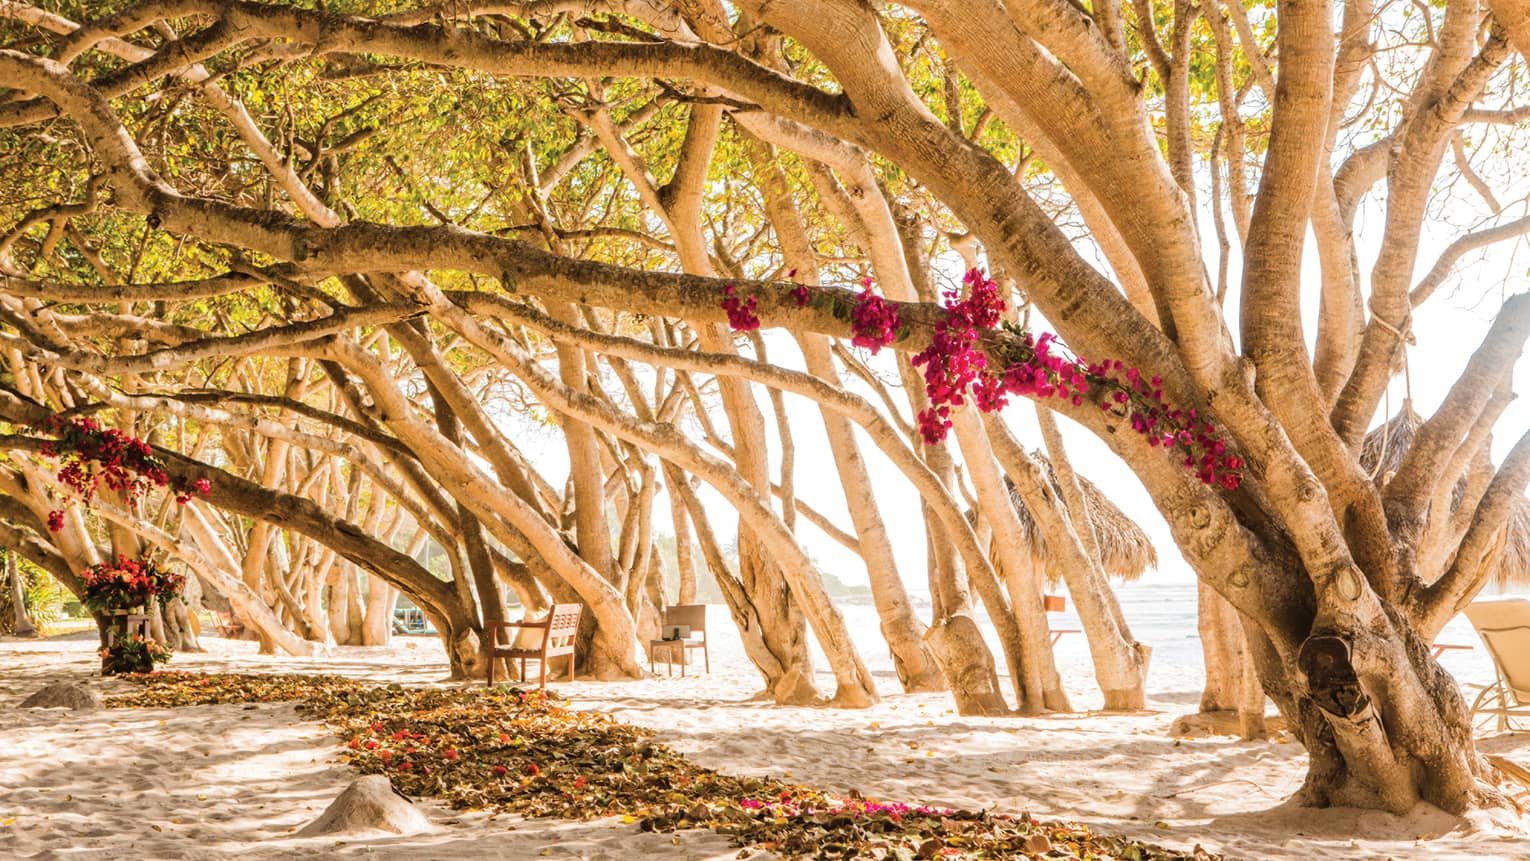 Row of trees, branches with pink flowers stretch over beach trail